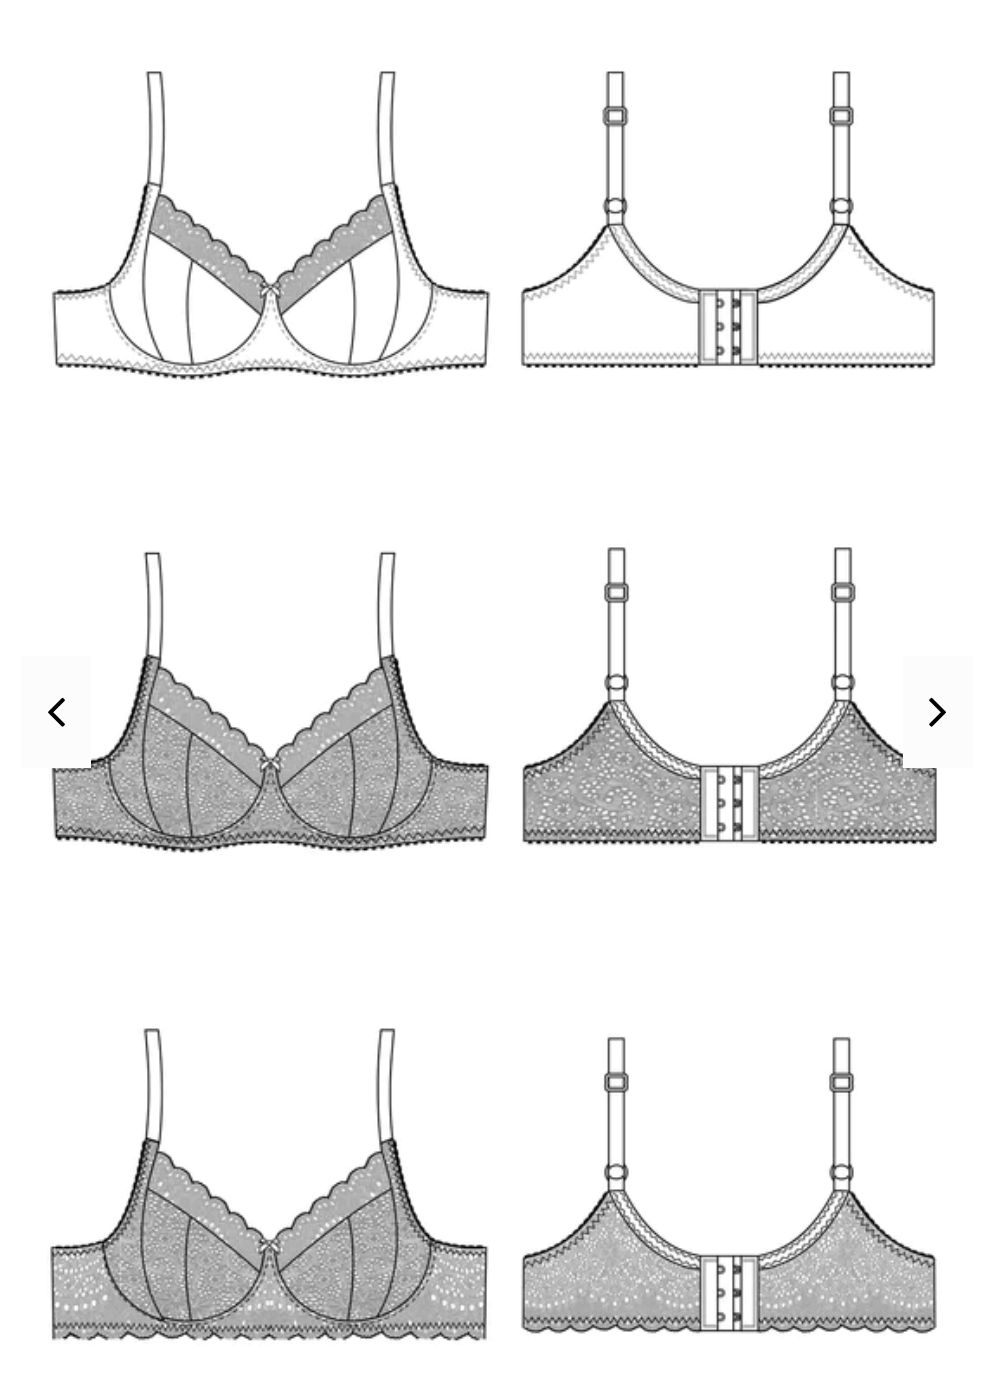 New bra sizing standards from Jockey sewing discussion topic @  PatternReview.com